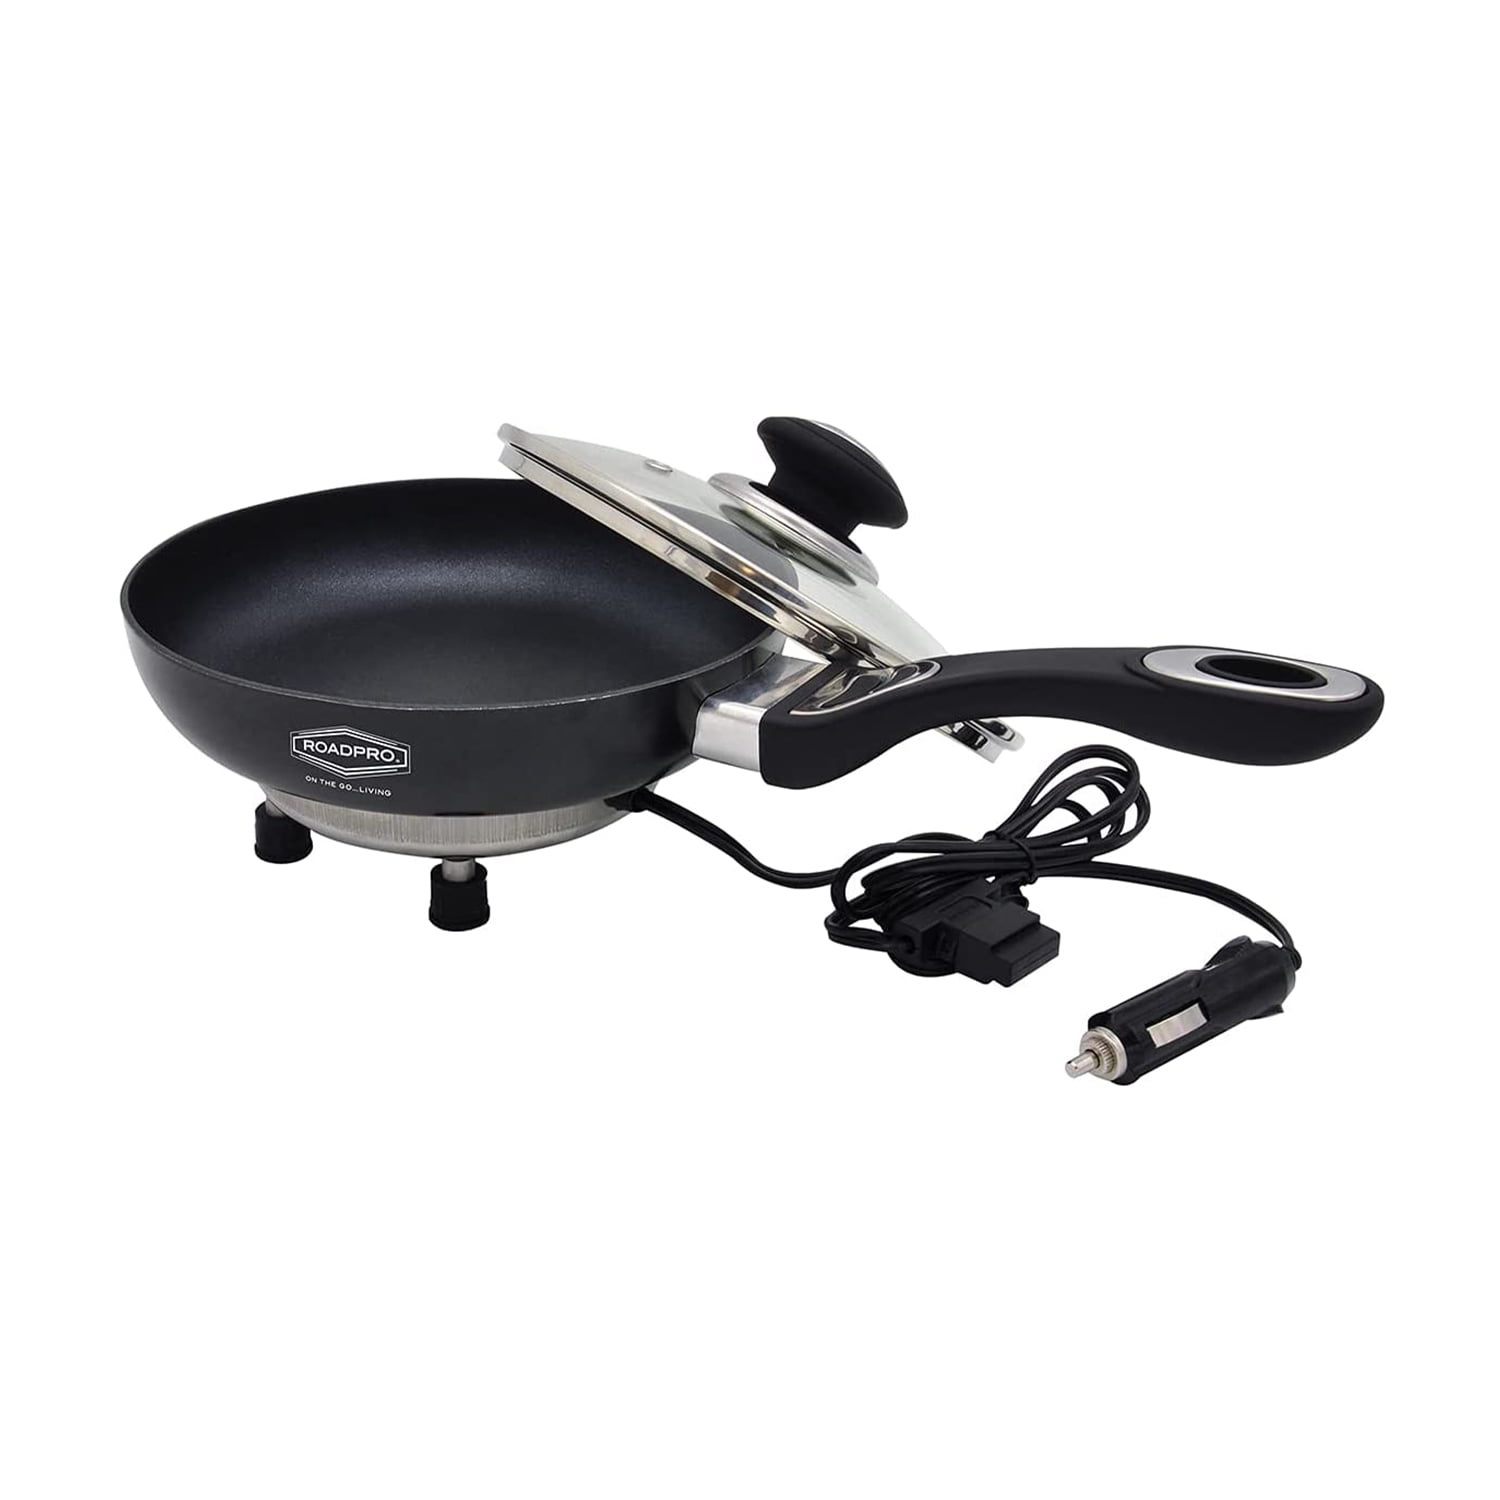 This Portable Frying Pan Could Make Your DIY Trips Even Easier